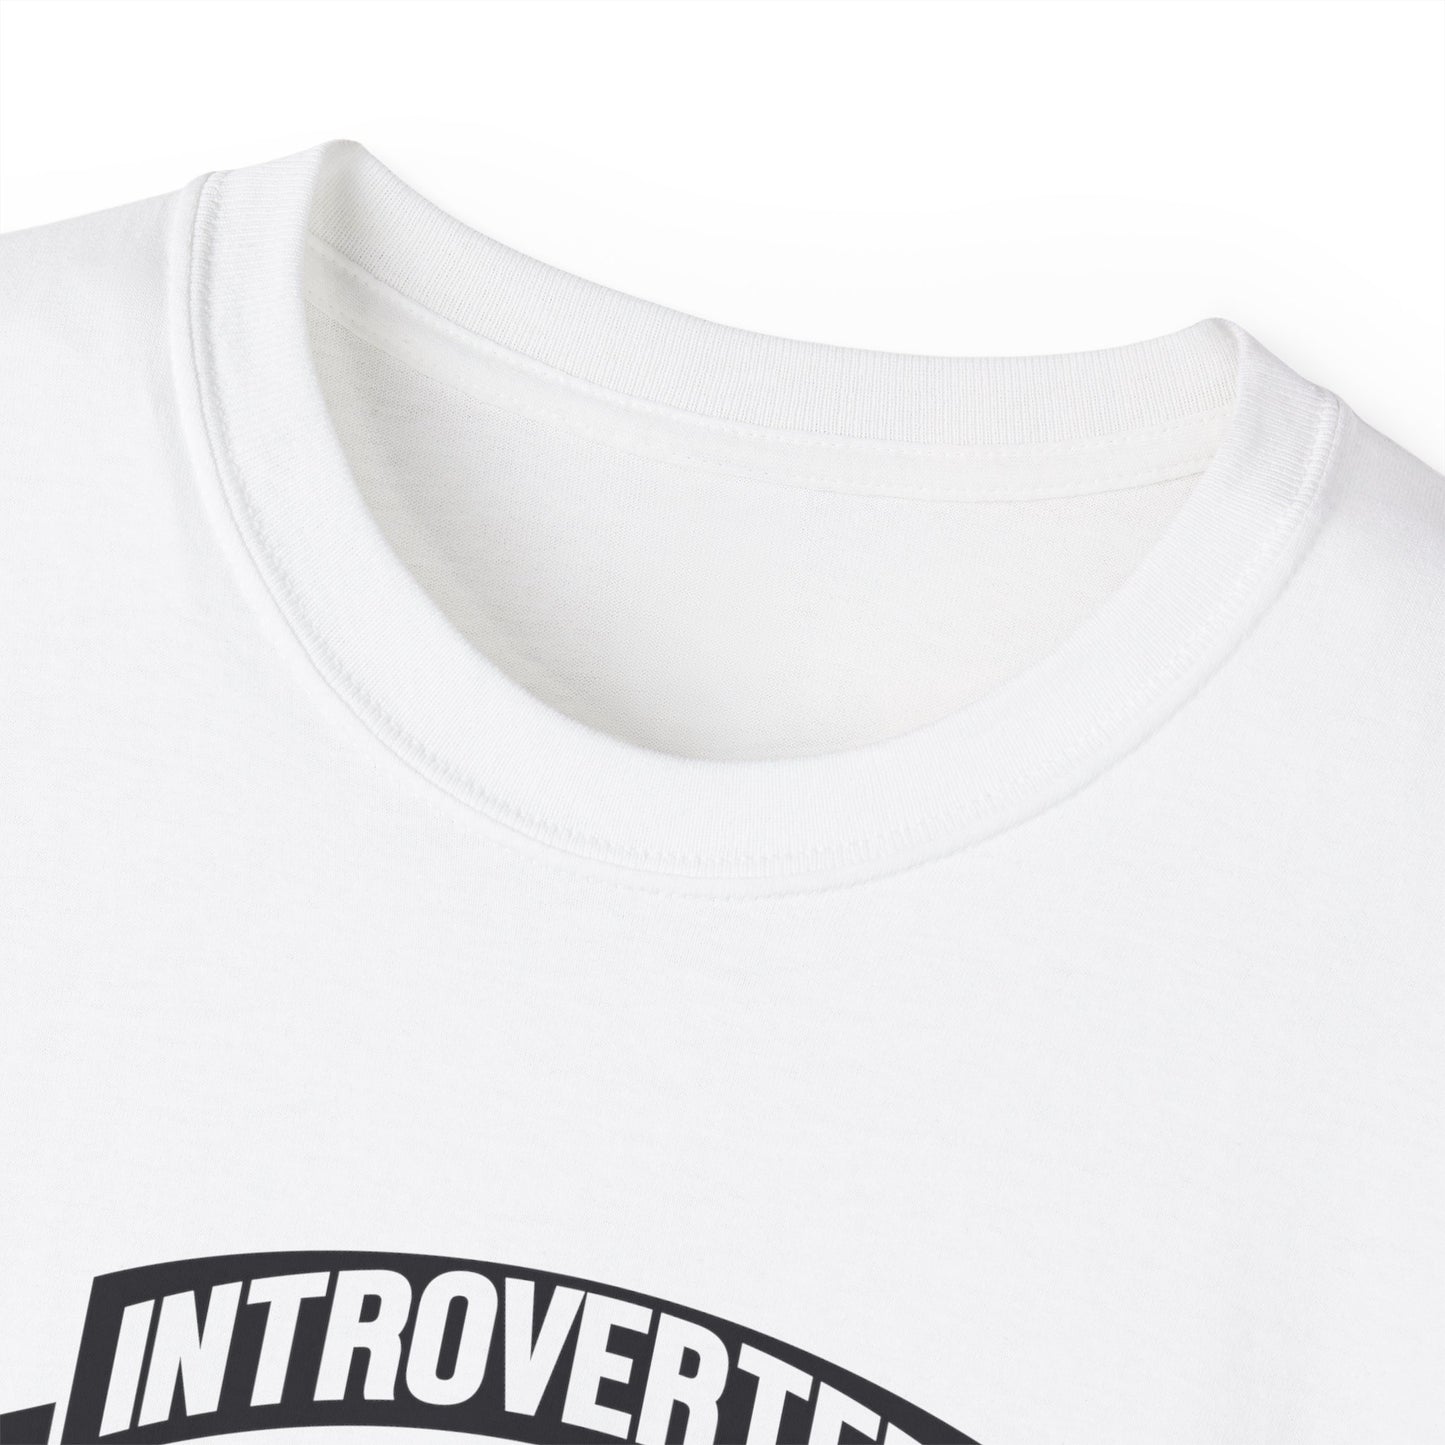 Introverted But Willing To Discuss Jesus Unisex Christian Ultra Cotton Tee Printify